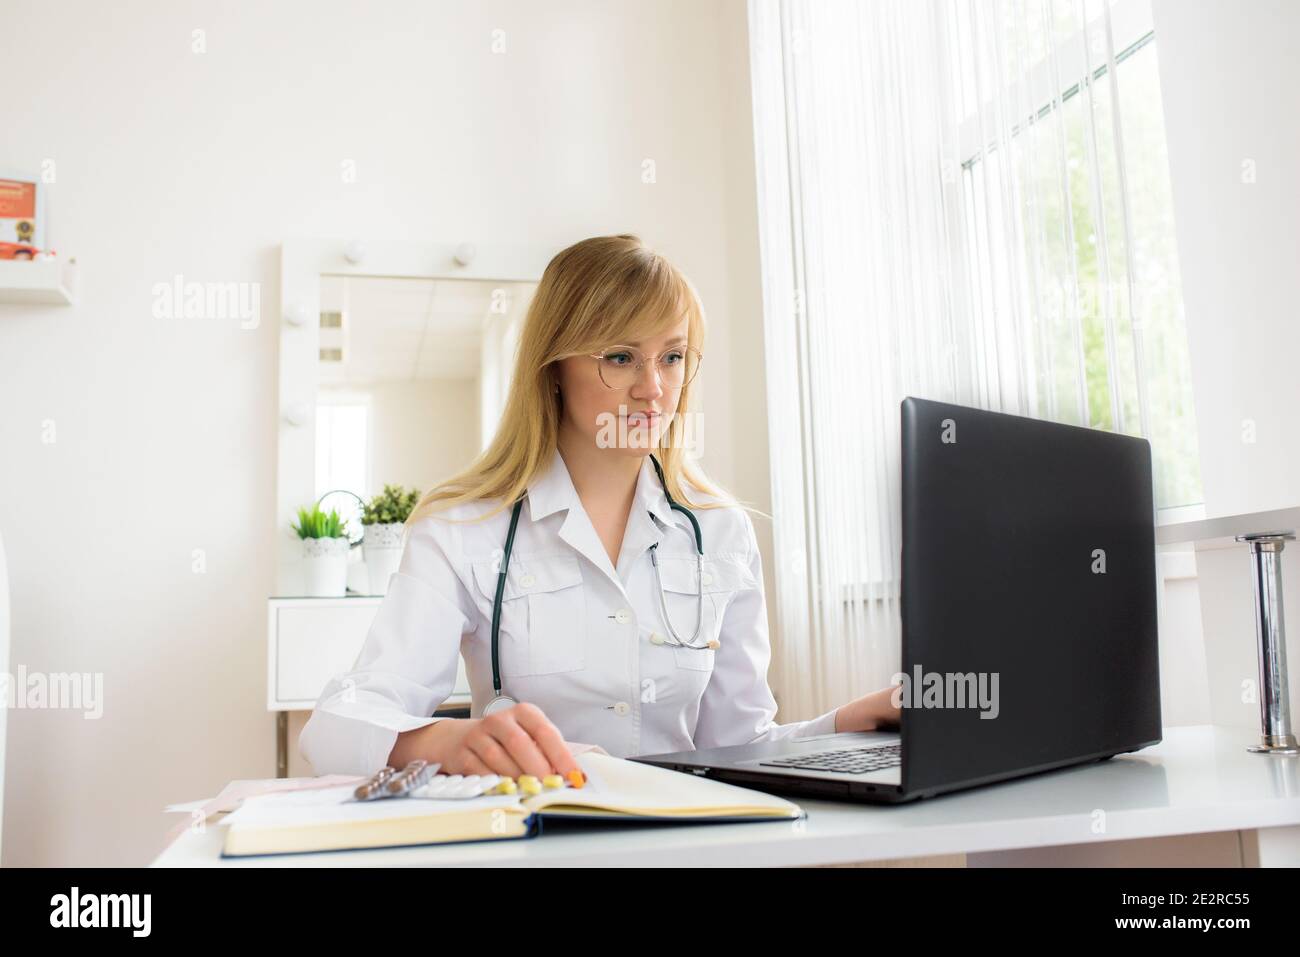 Online doctor consultation.Confident female doctor sitting at office desk and smiling at camera, health care and prevention concept Stock Photo